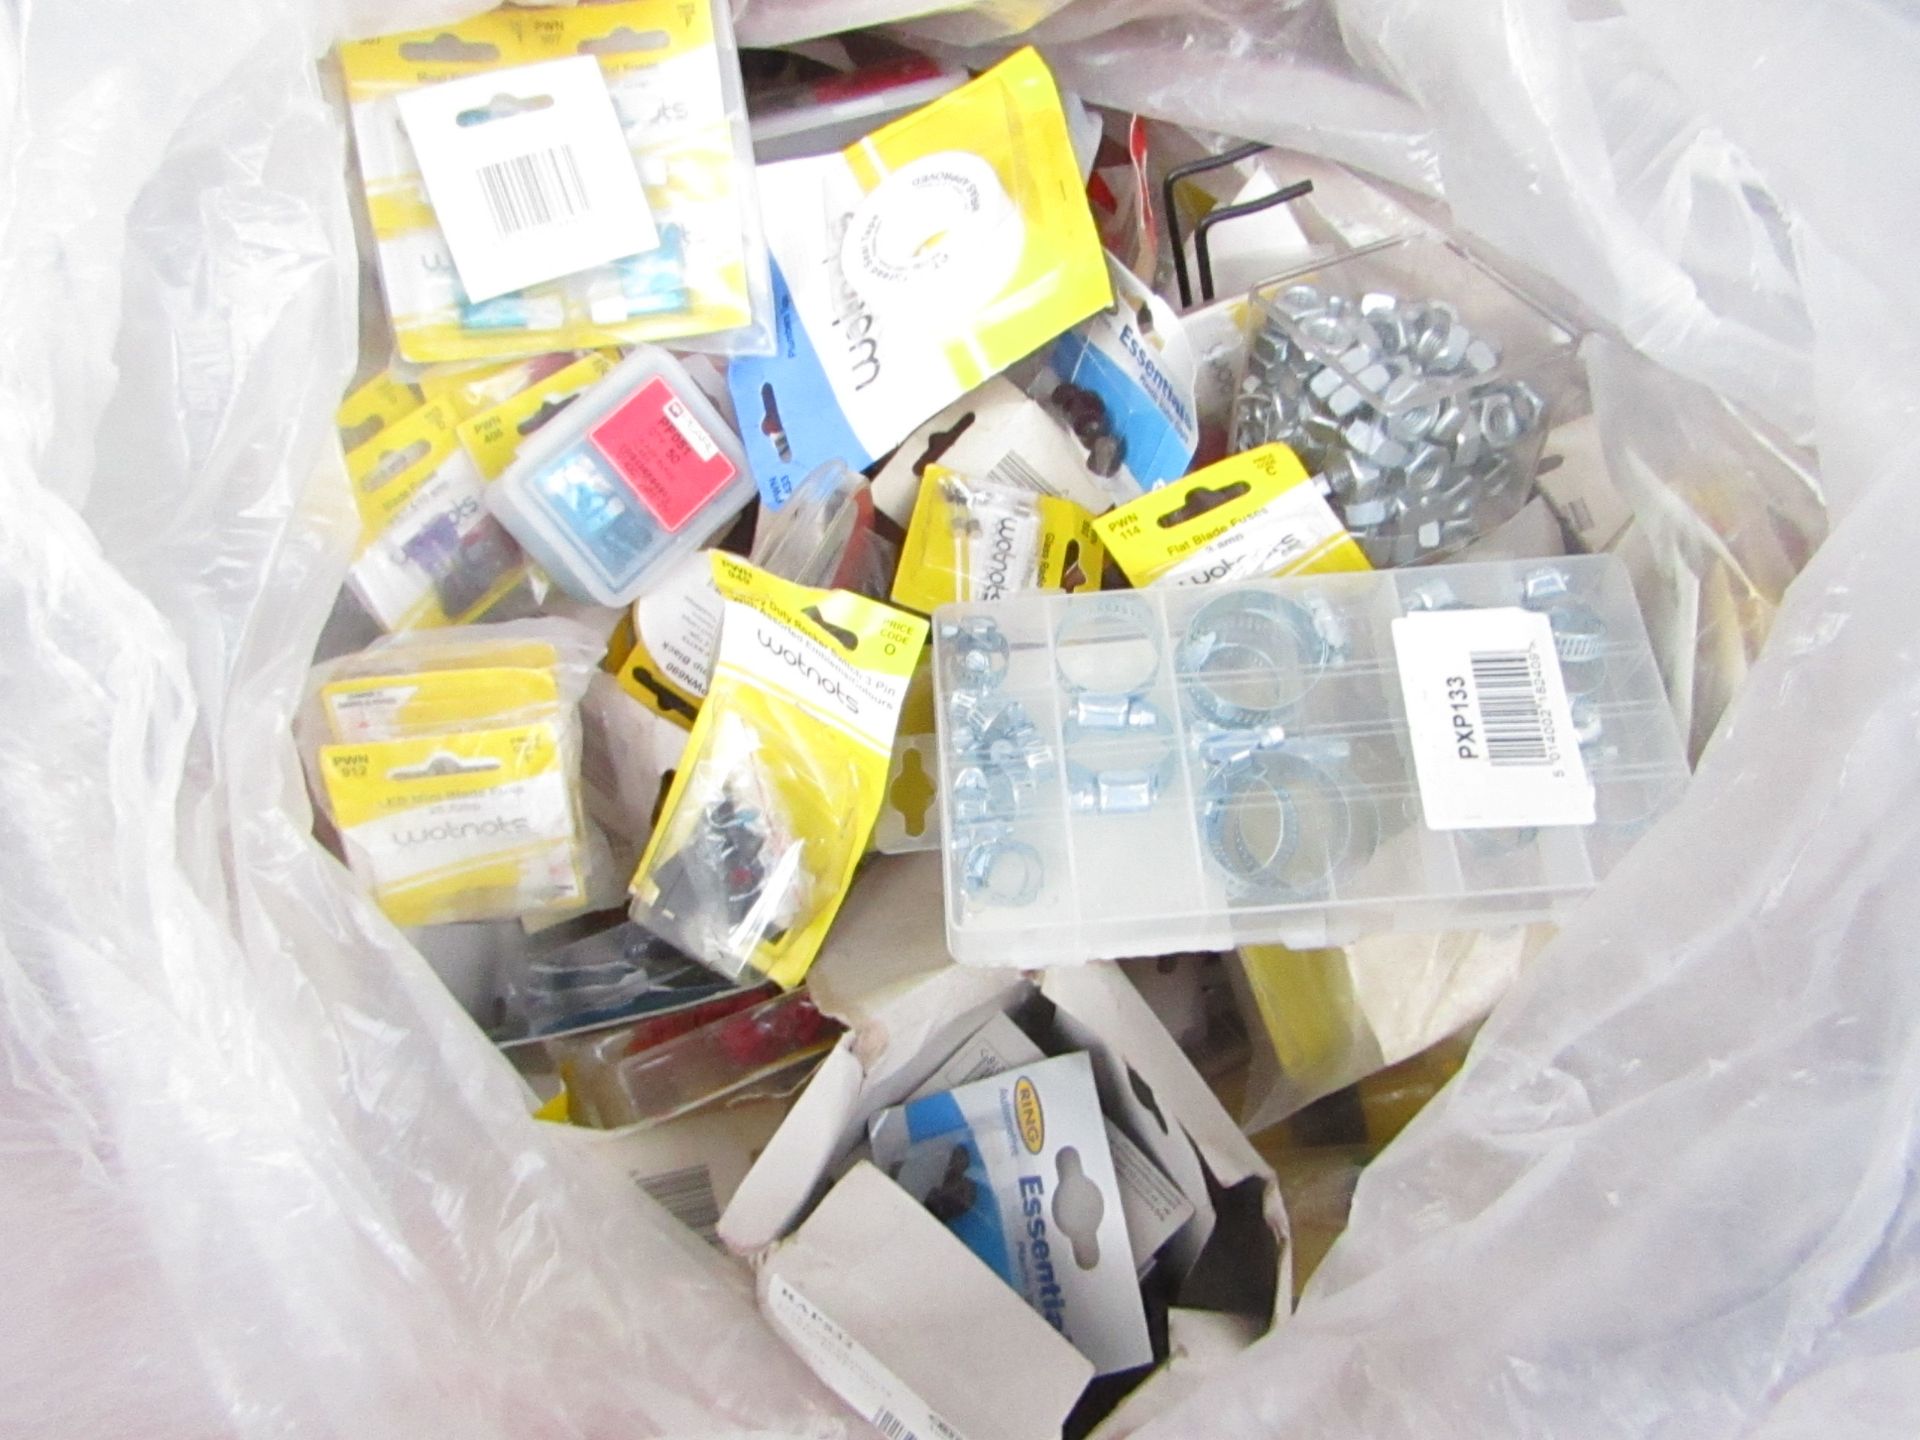 Bag of Mixed Electrical connectors, fuses and much more